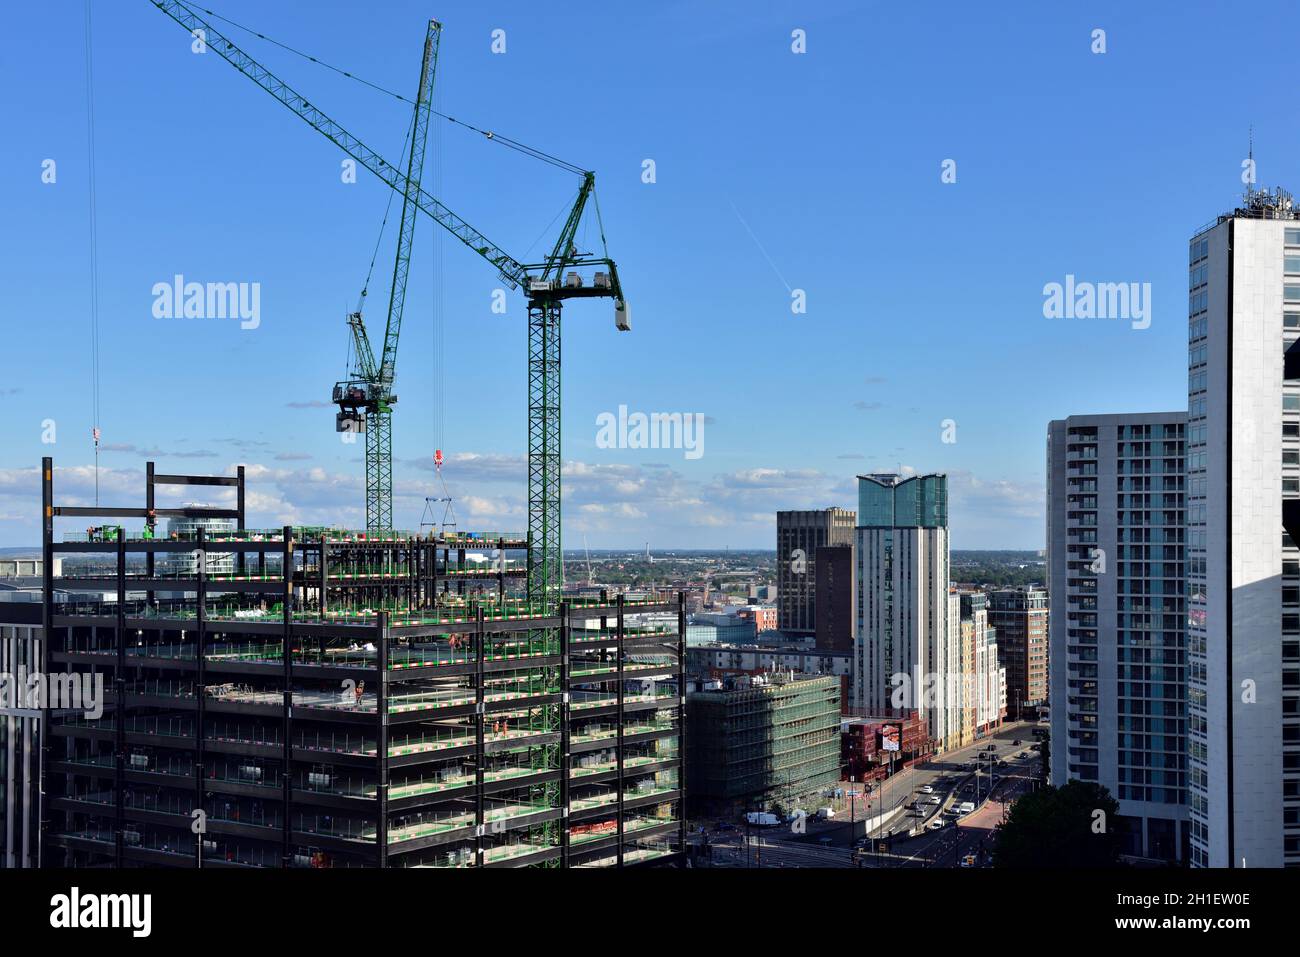 View of tall buildings across Birmingham city centre skyline with new one under construction, UK Stock Photo